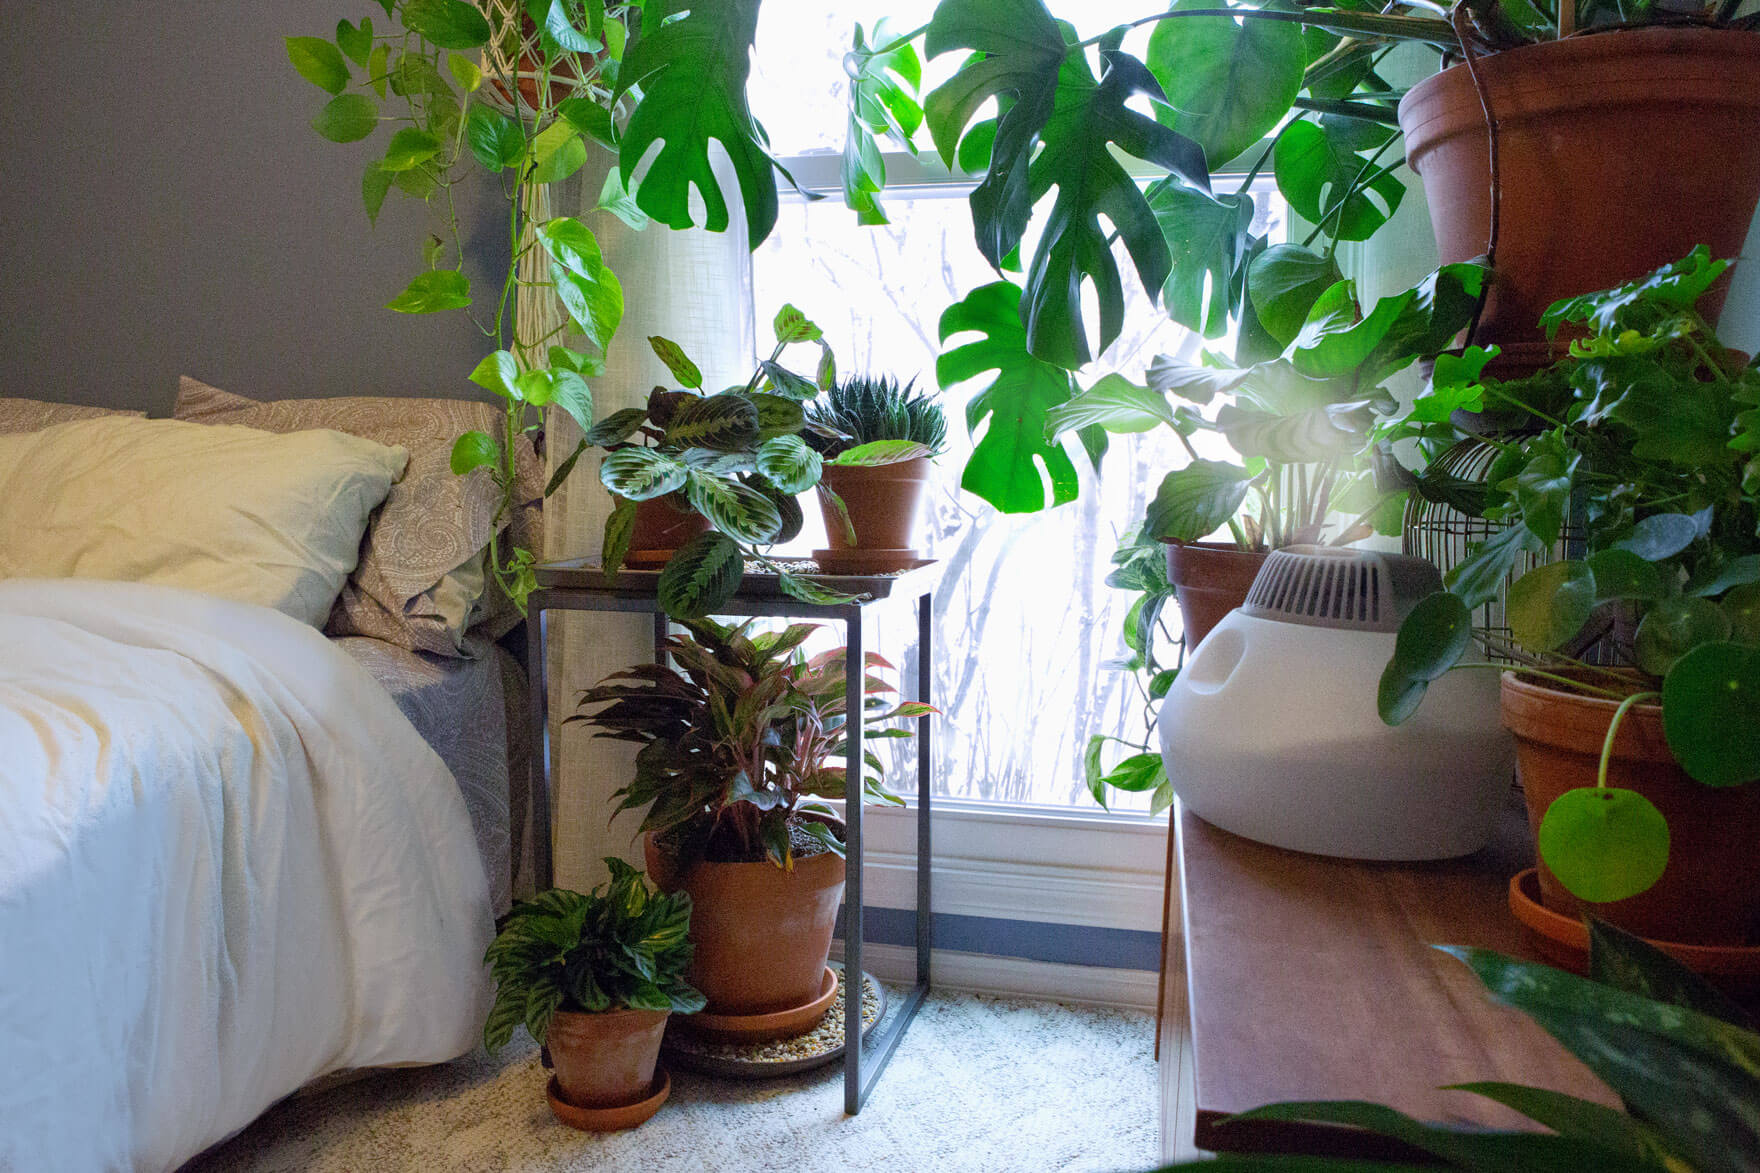 How To Add Humidity To A Room Without A Humidifier